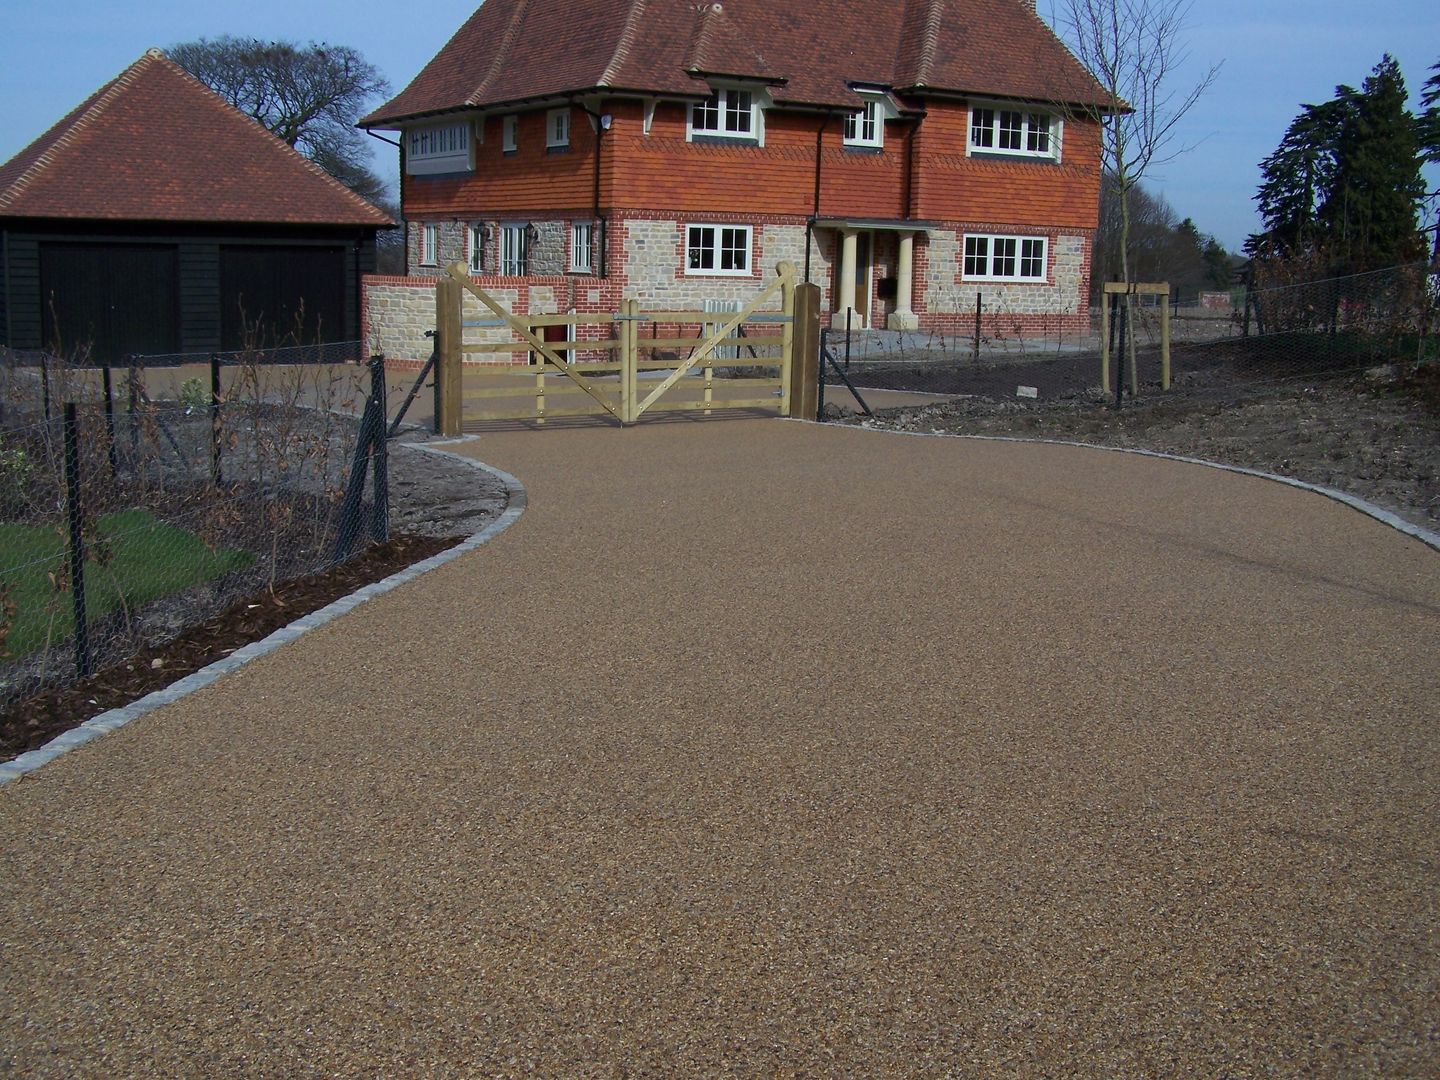 Domestic Driveways installation of resin bound paving, Permeable Paving Solutions UK Permeable Paving Solutions UK Rustik Duvar & Zemin